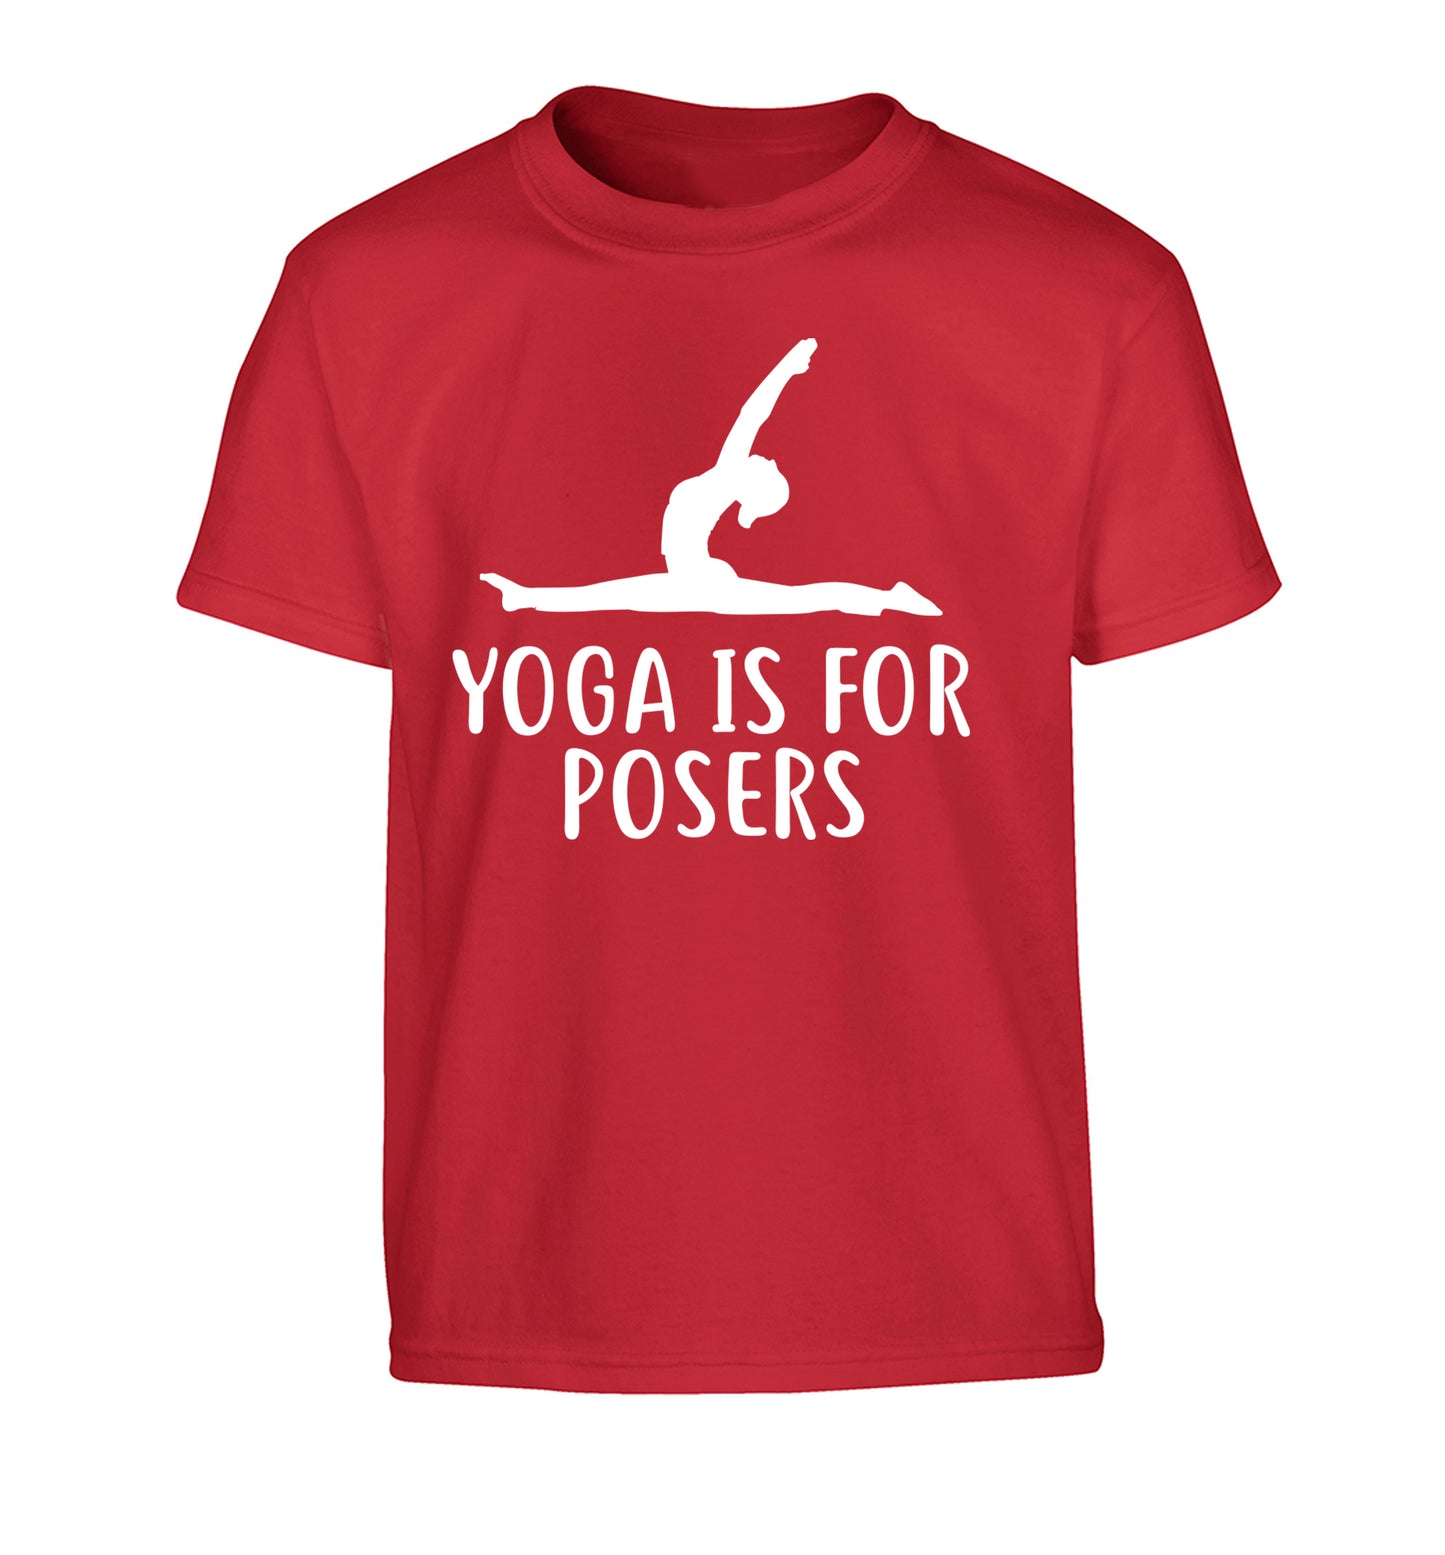 Yoga is for posers Children's red Tshirt 12-13 Years